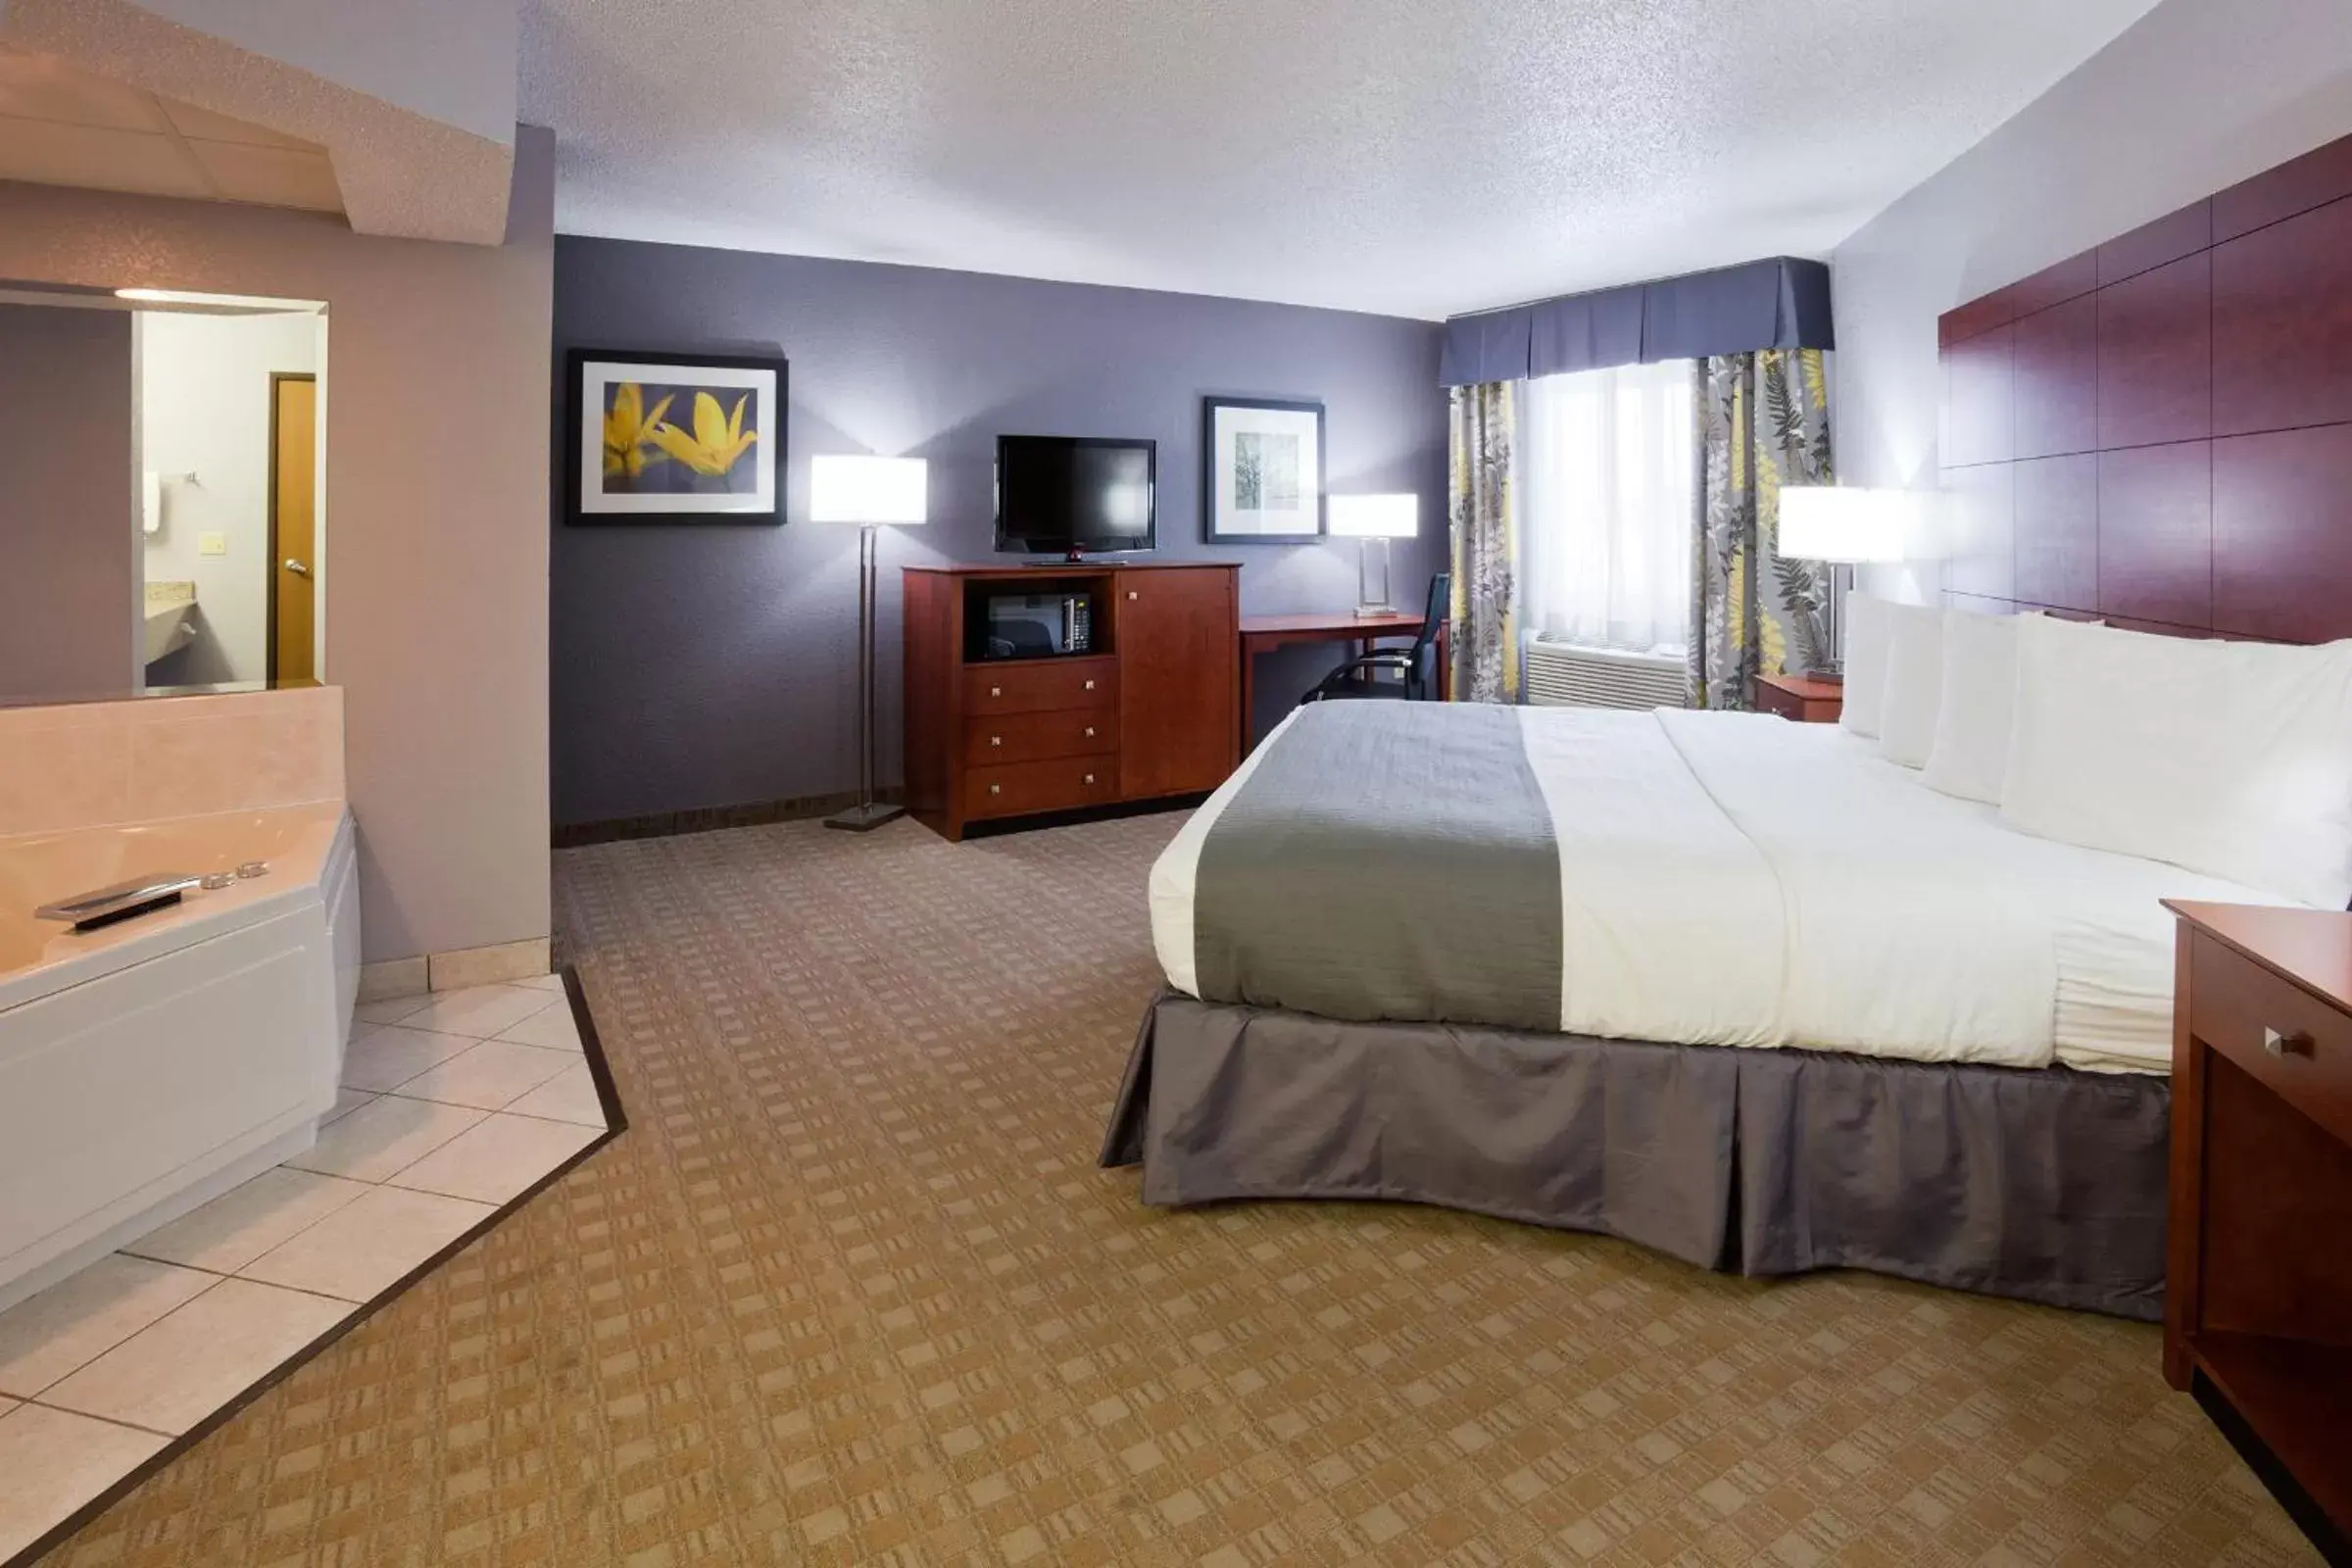 Guests in AmericInn by Wyndham Ankeny/Des Moines